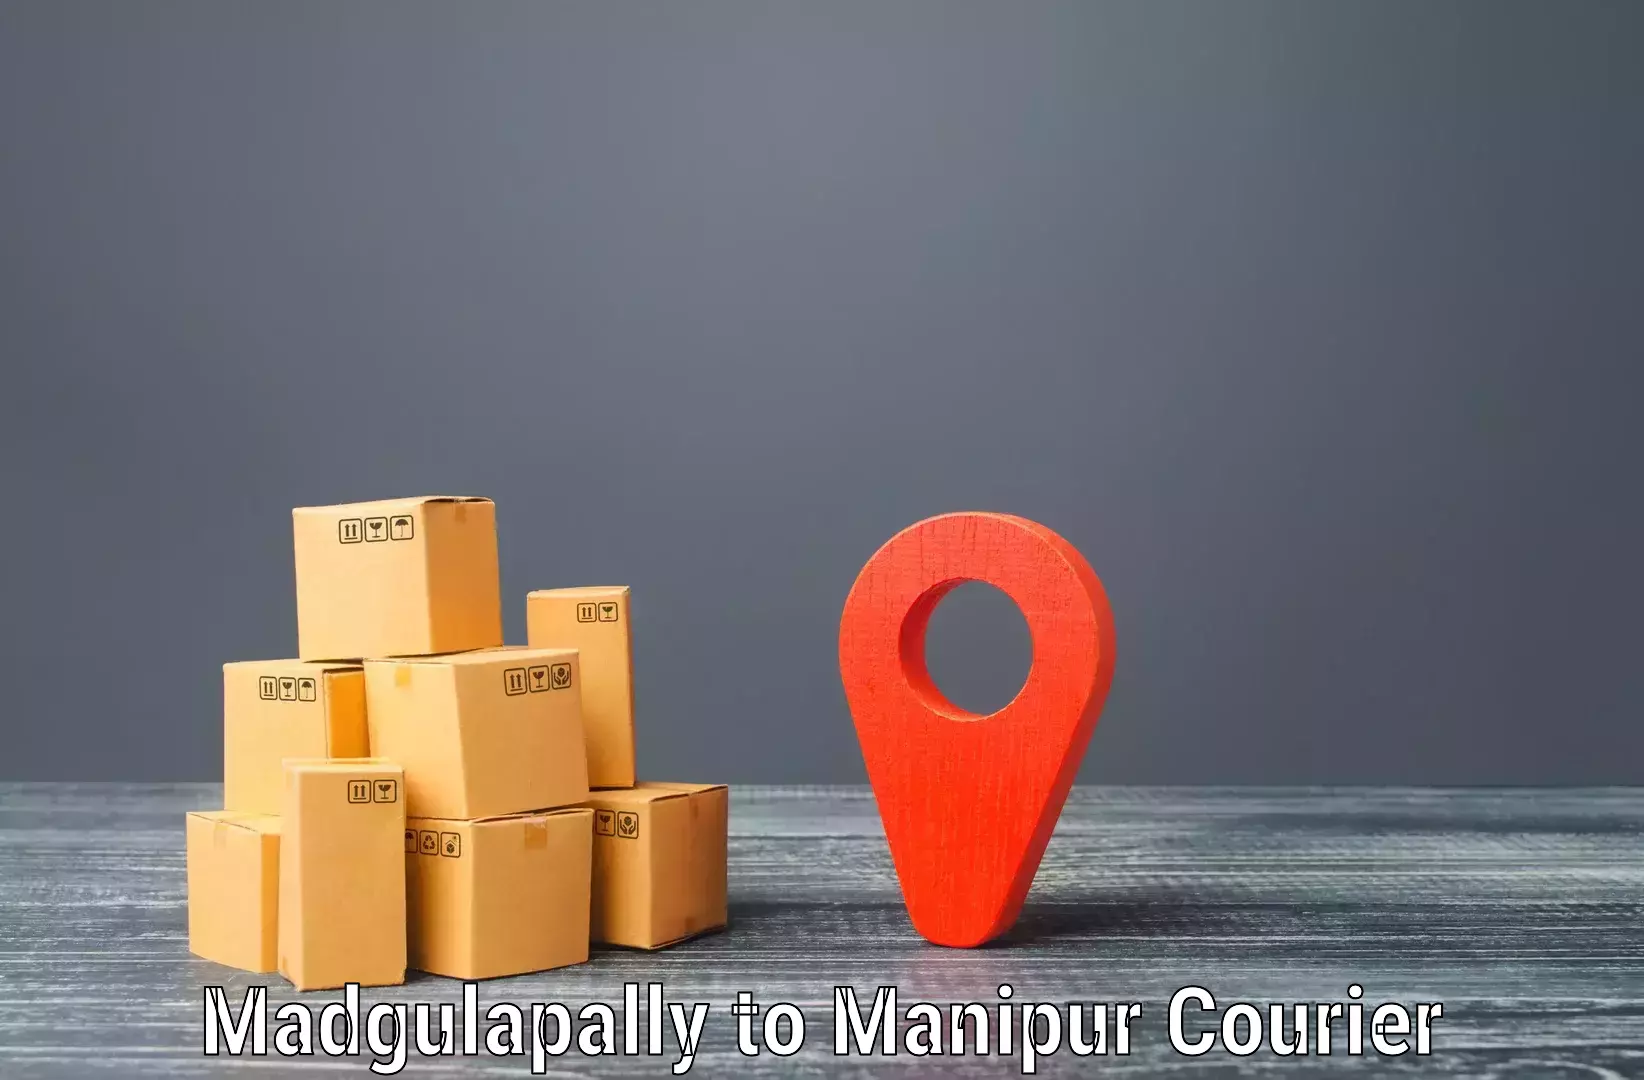 Enhanced tracking features in Madgulapally to Chandel